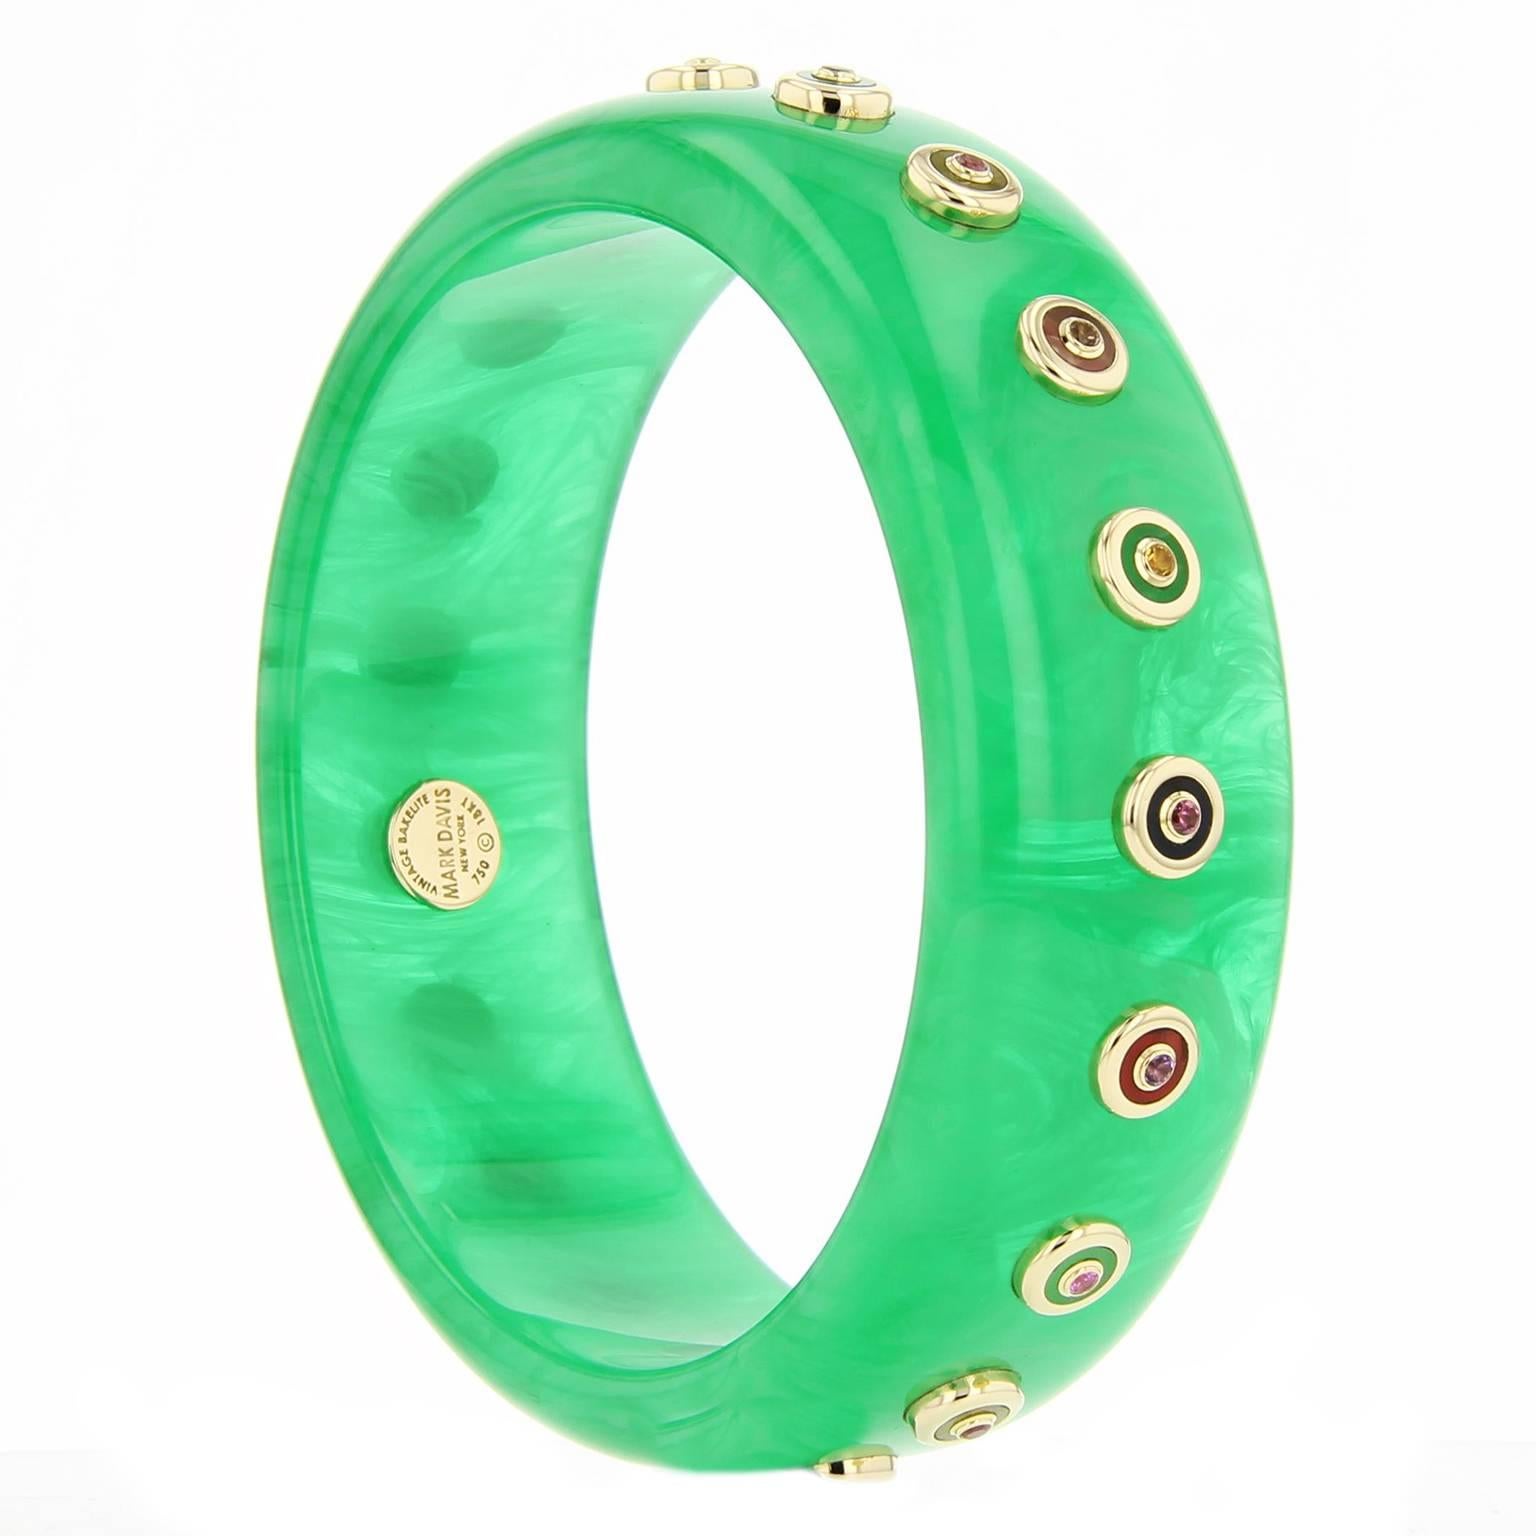 This unique Mark Davis bangle was handcrafted using translucent green vintage bakelite. Each 18k yellow gold stud is inlaid with various multi-colored bakelite pieces and topped with amethyst, citrine, garnet, peridot, or pink, yellow and blue